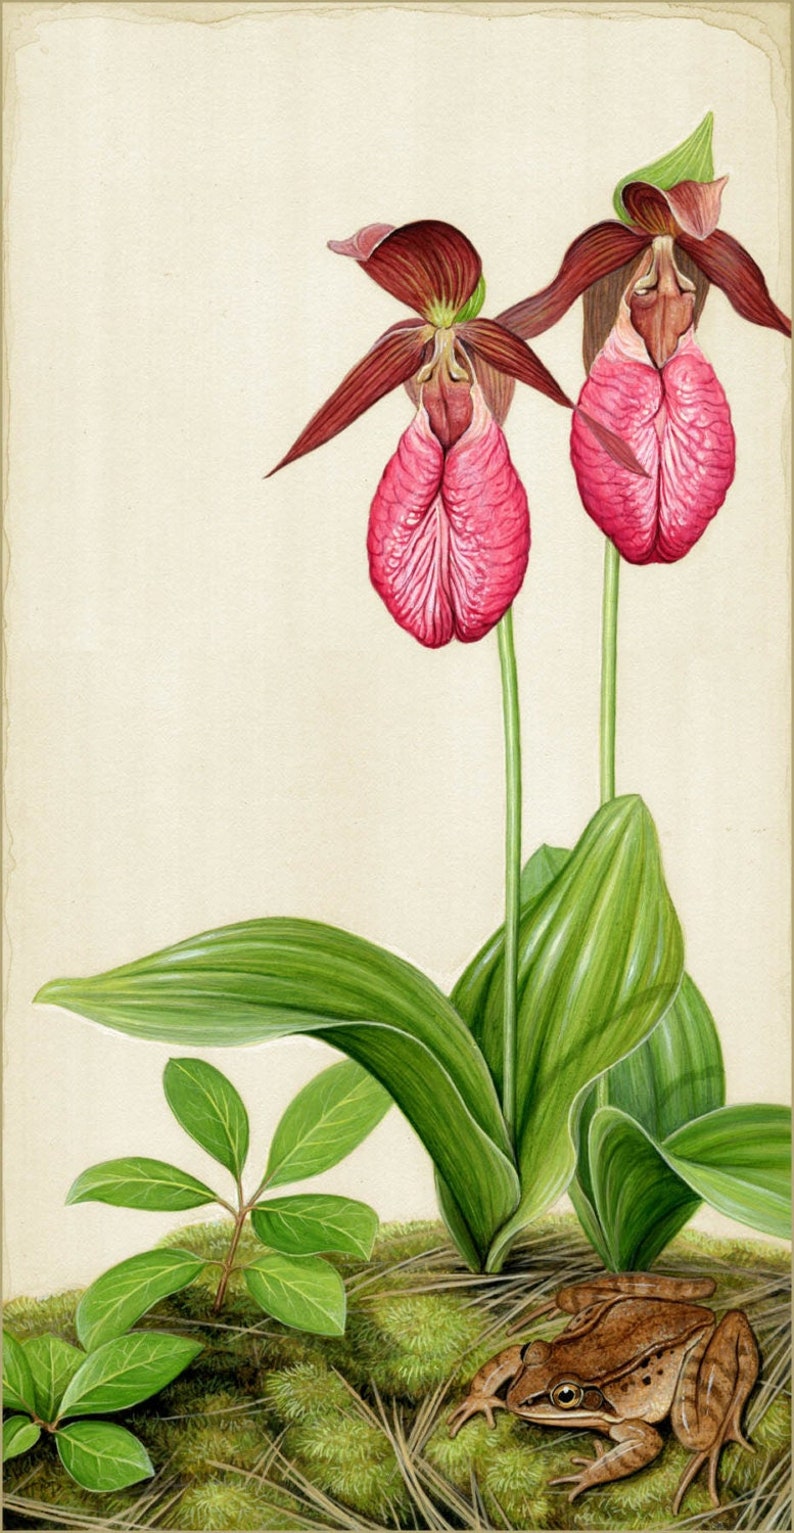 Lady Slippers and Wood Frog 14 x 7.25 inch print by Matt Patterson image 1